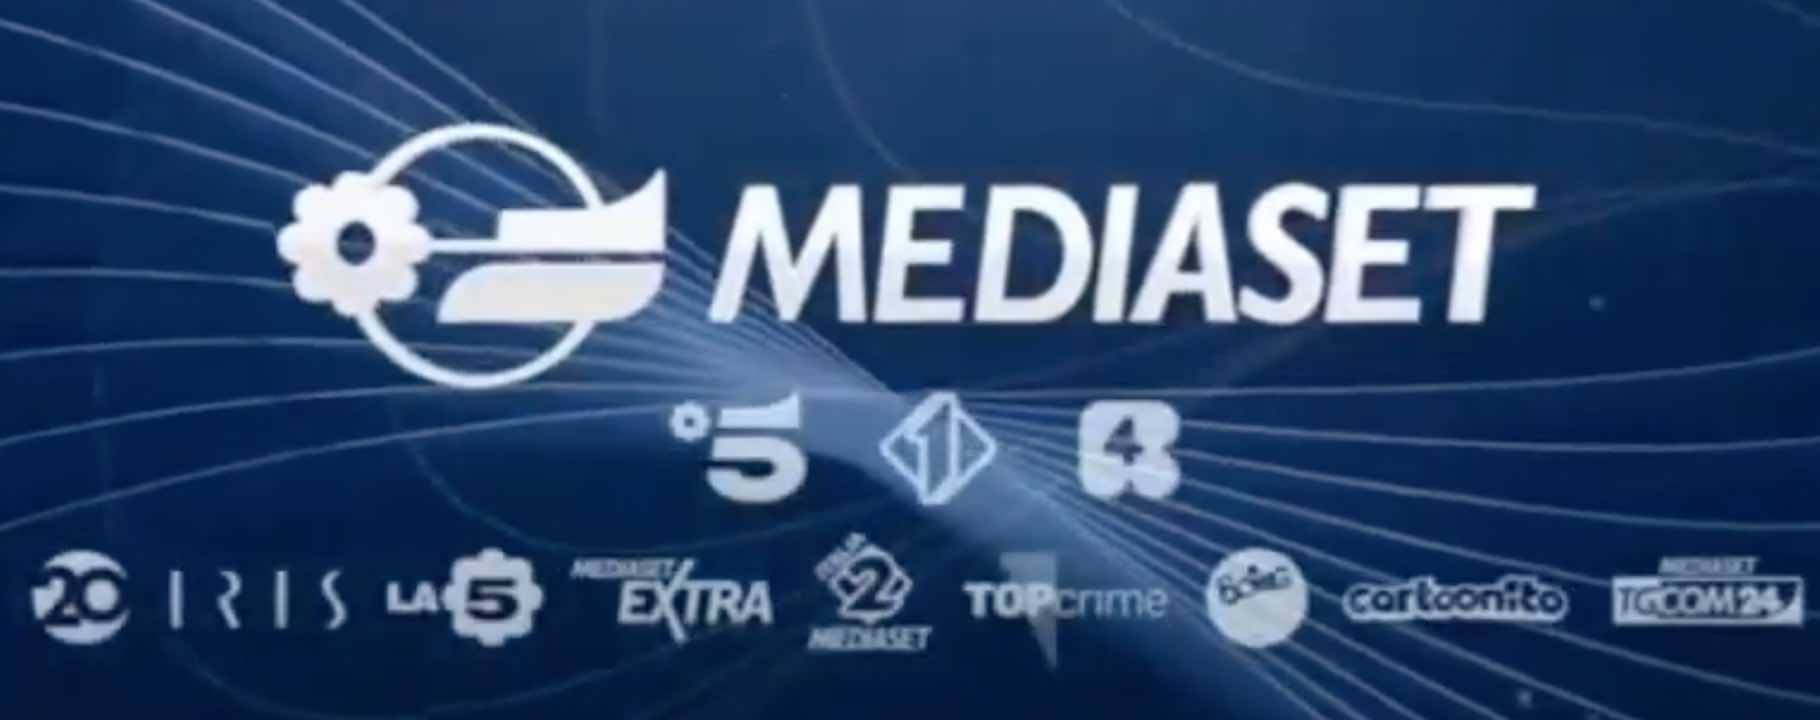 Shock decision by Mediaset: after years three programs greet the public, sensational!